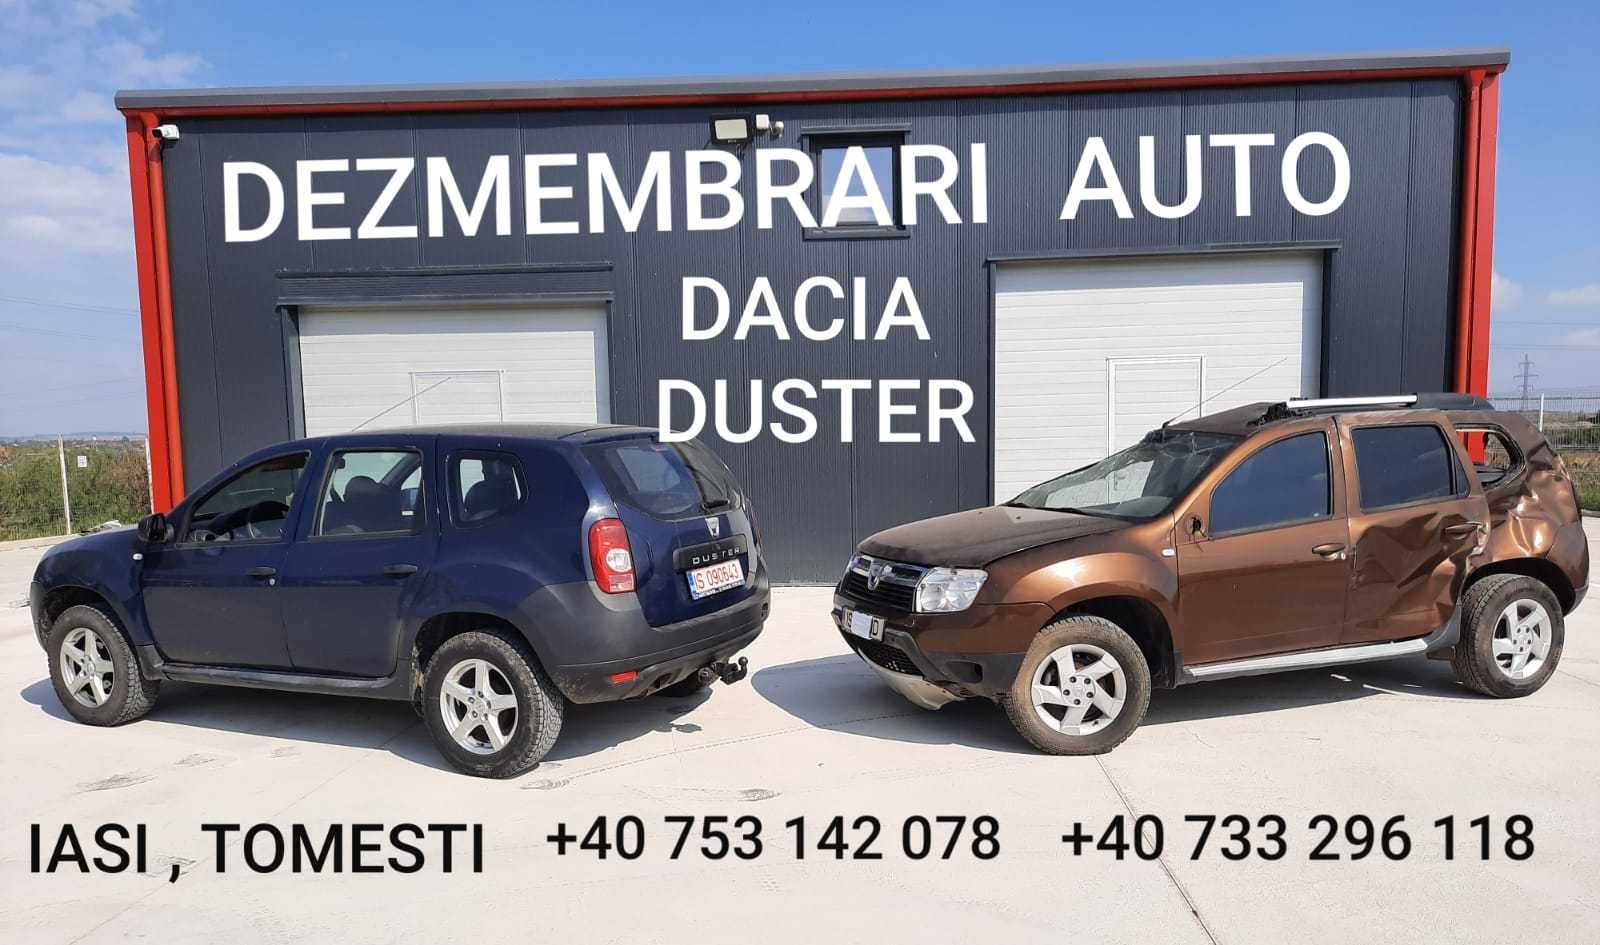 Piese MOTOR Dacia Duster 2010 -2015 -2019 1.5 dci si 1.6 16v 4x2, 4x4